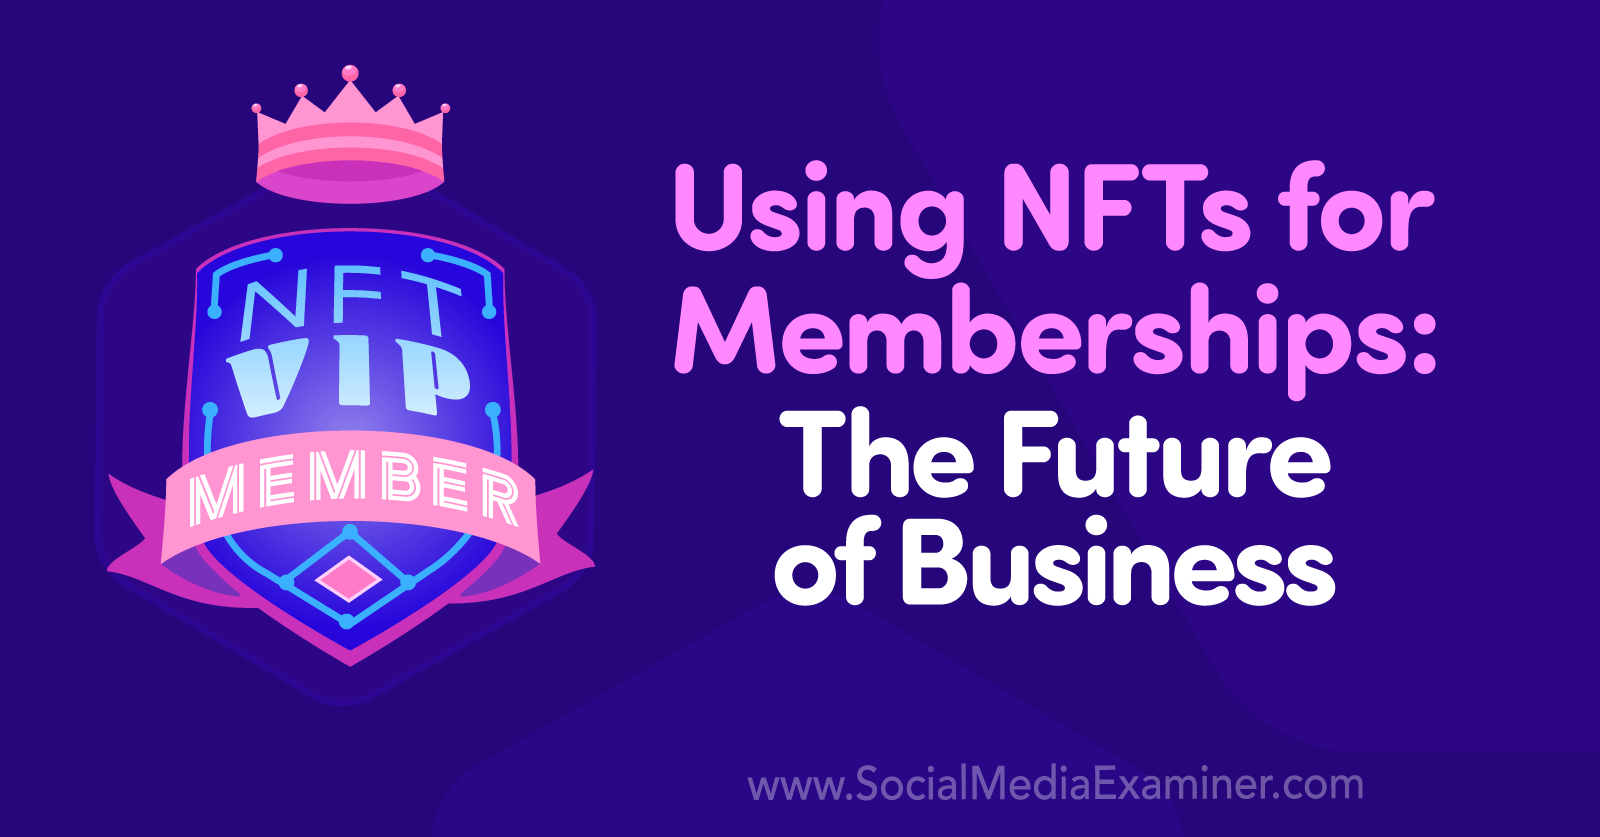 You are currently viewing Using NFTs for Memberships: The Future of Business